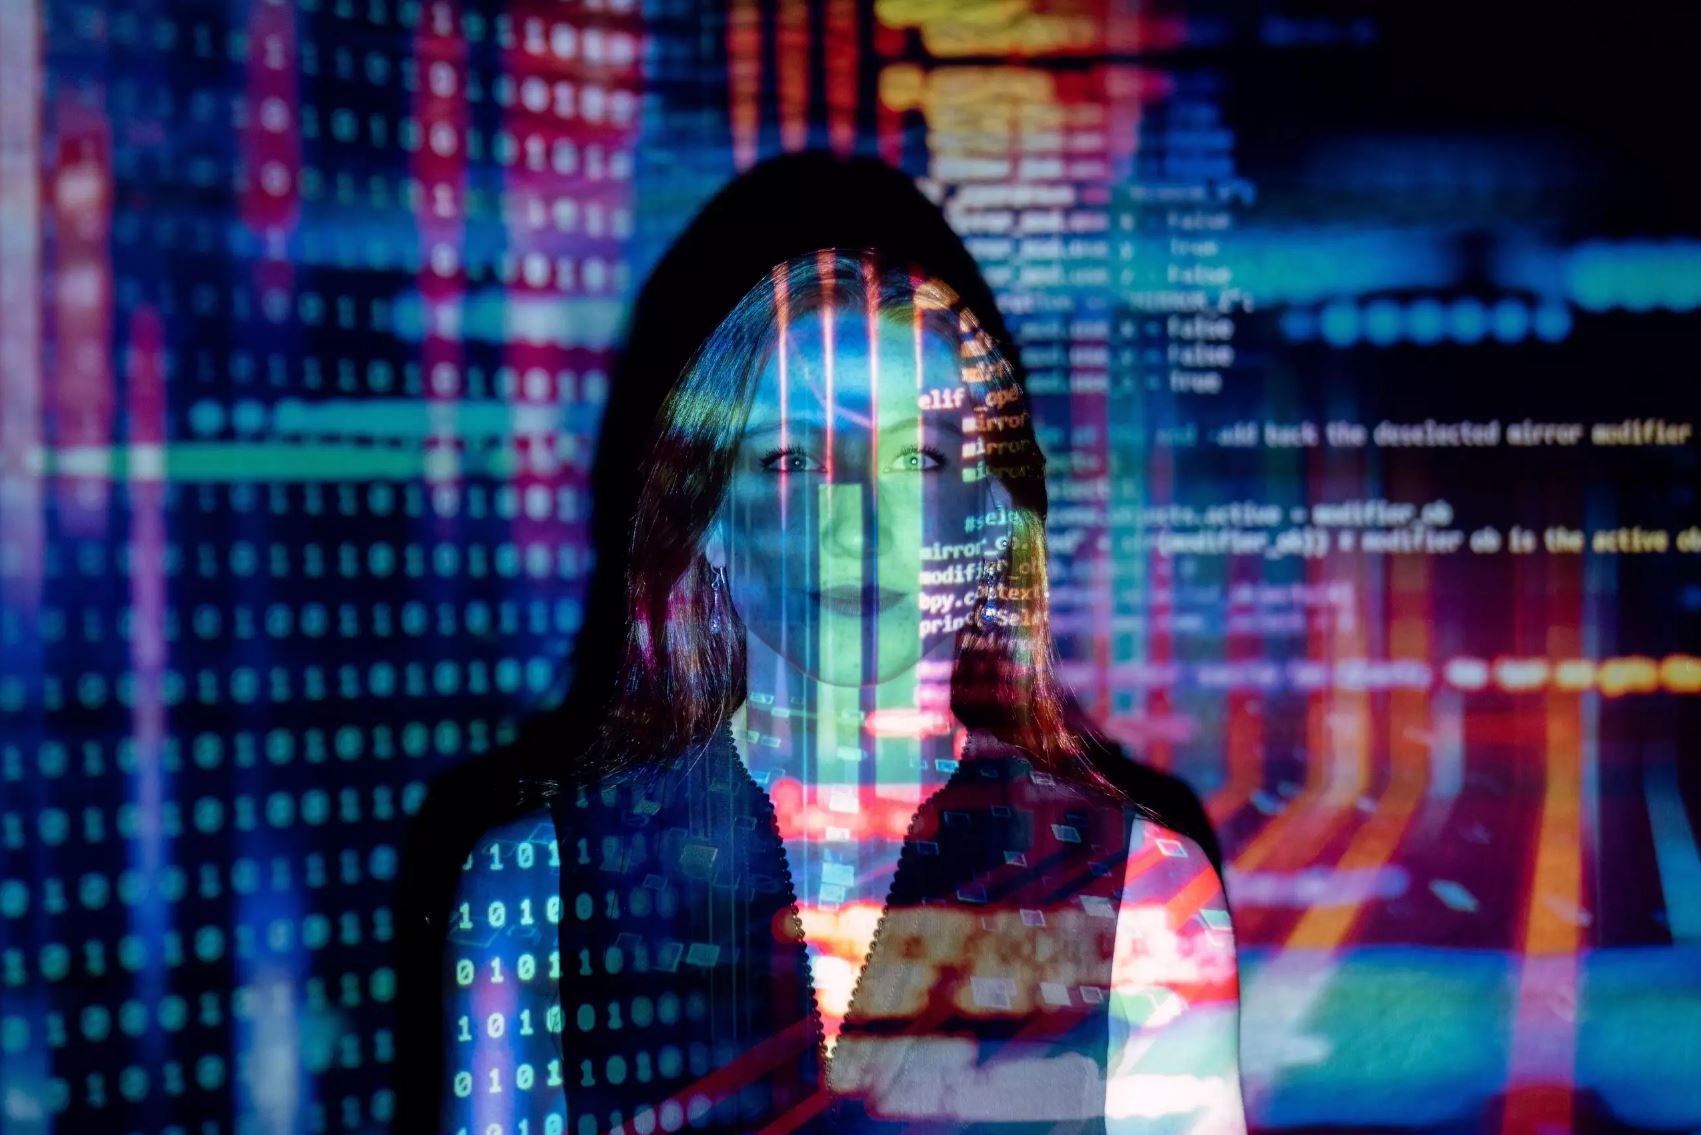 Lady with digital screen overlay (UK General Data Protection)